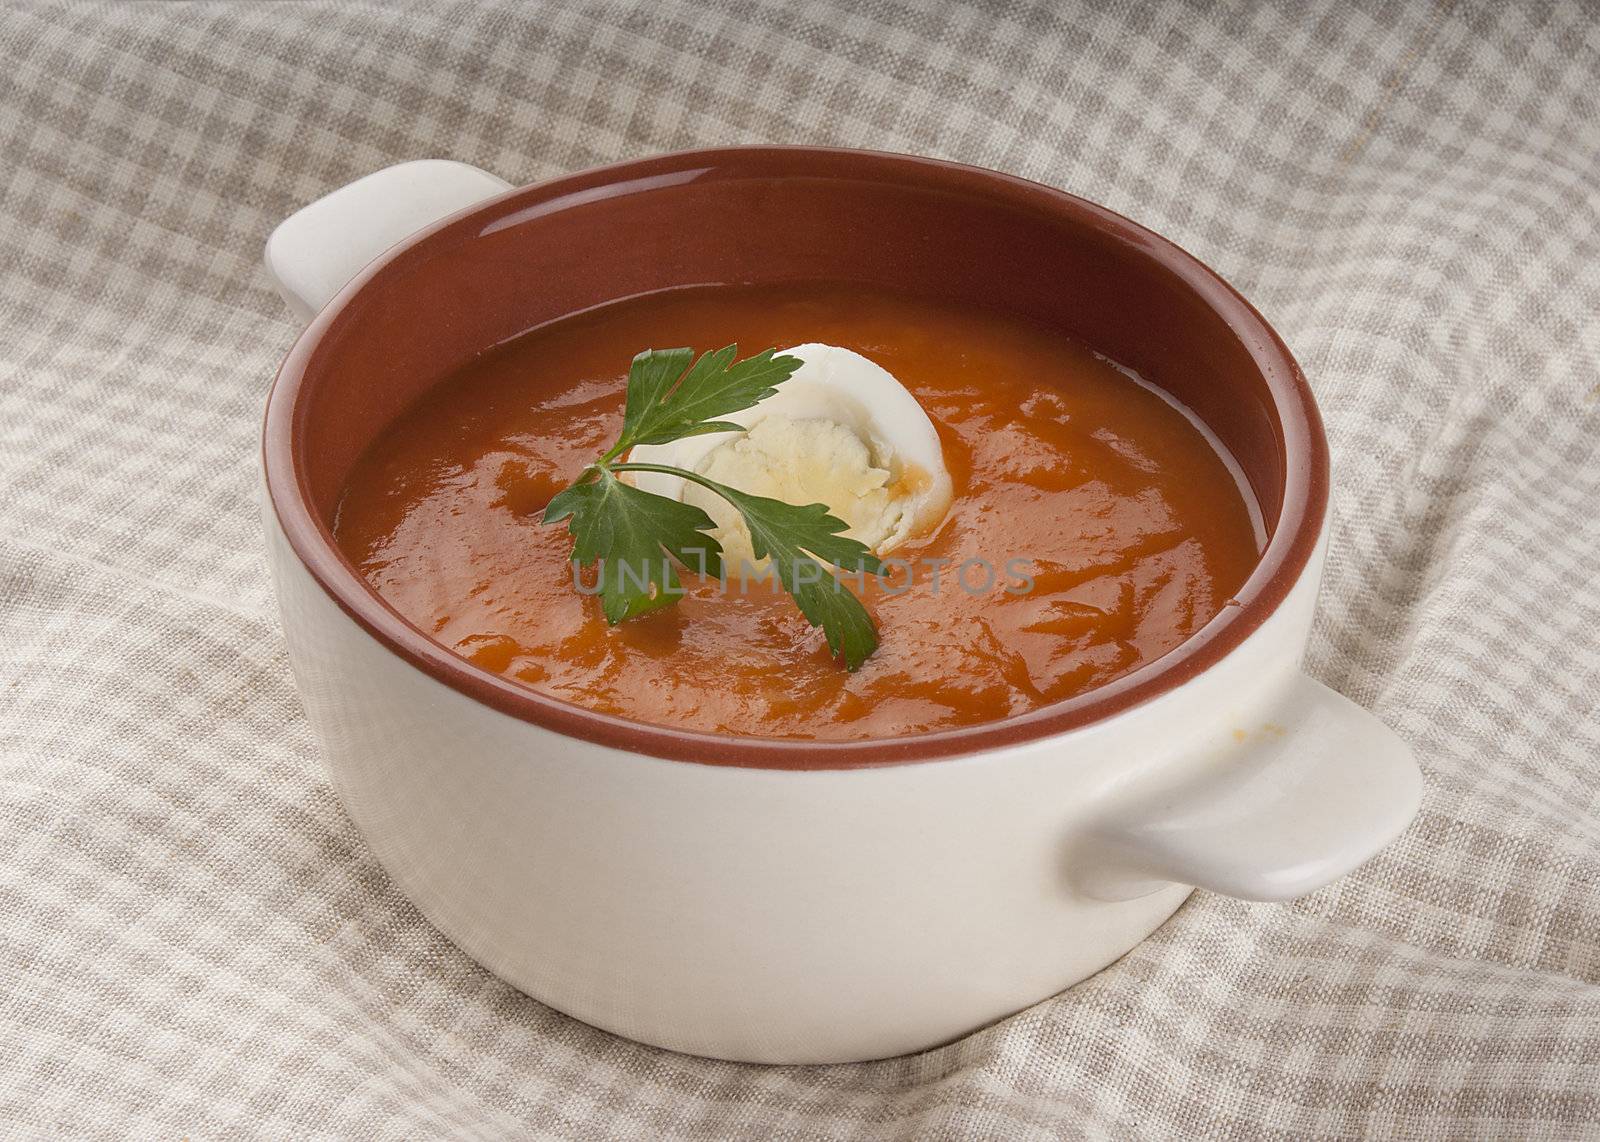 Tomato soup with parsley and boiled egg in the brown and white bowl